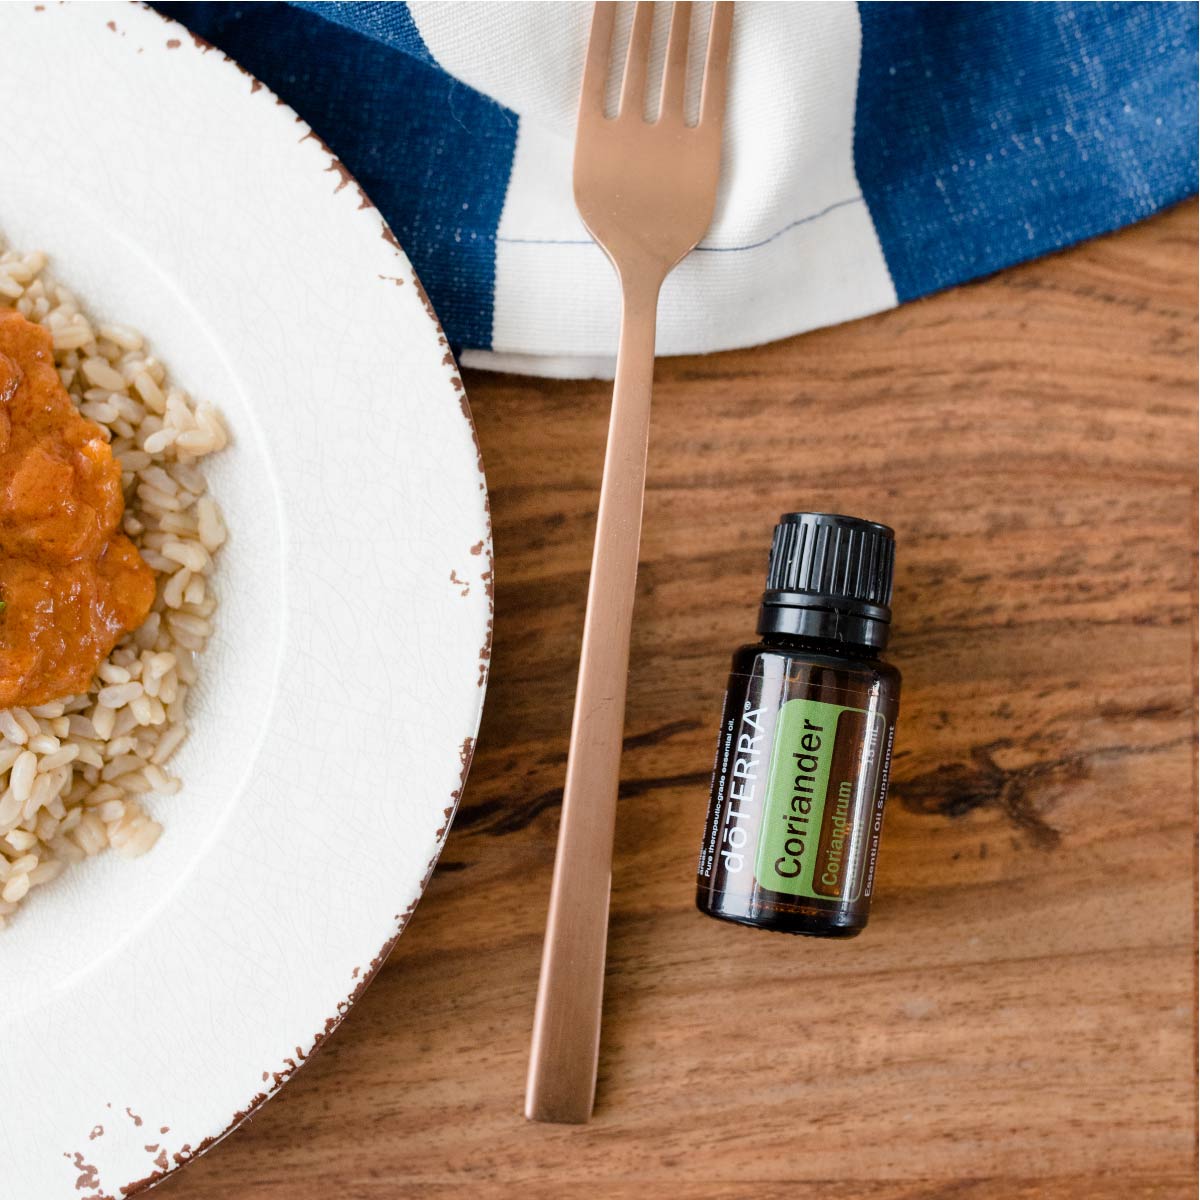 Bottle of Coriander oil next to fork and plate of food. What goes well with Coriander essential oil? Coriander oil blends well with essential oils like Peppermint oil and Wintergreen oil.